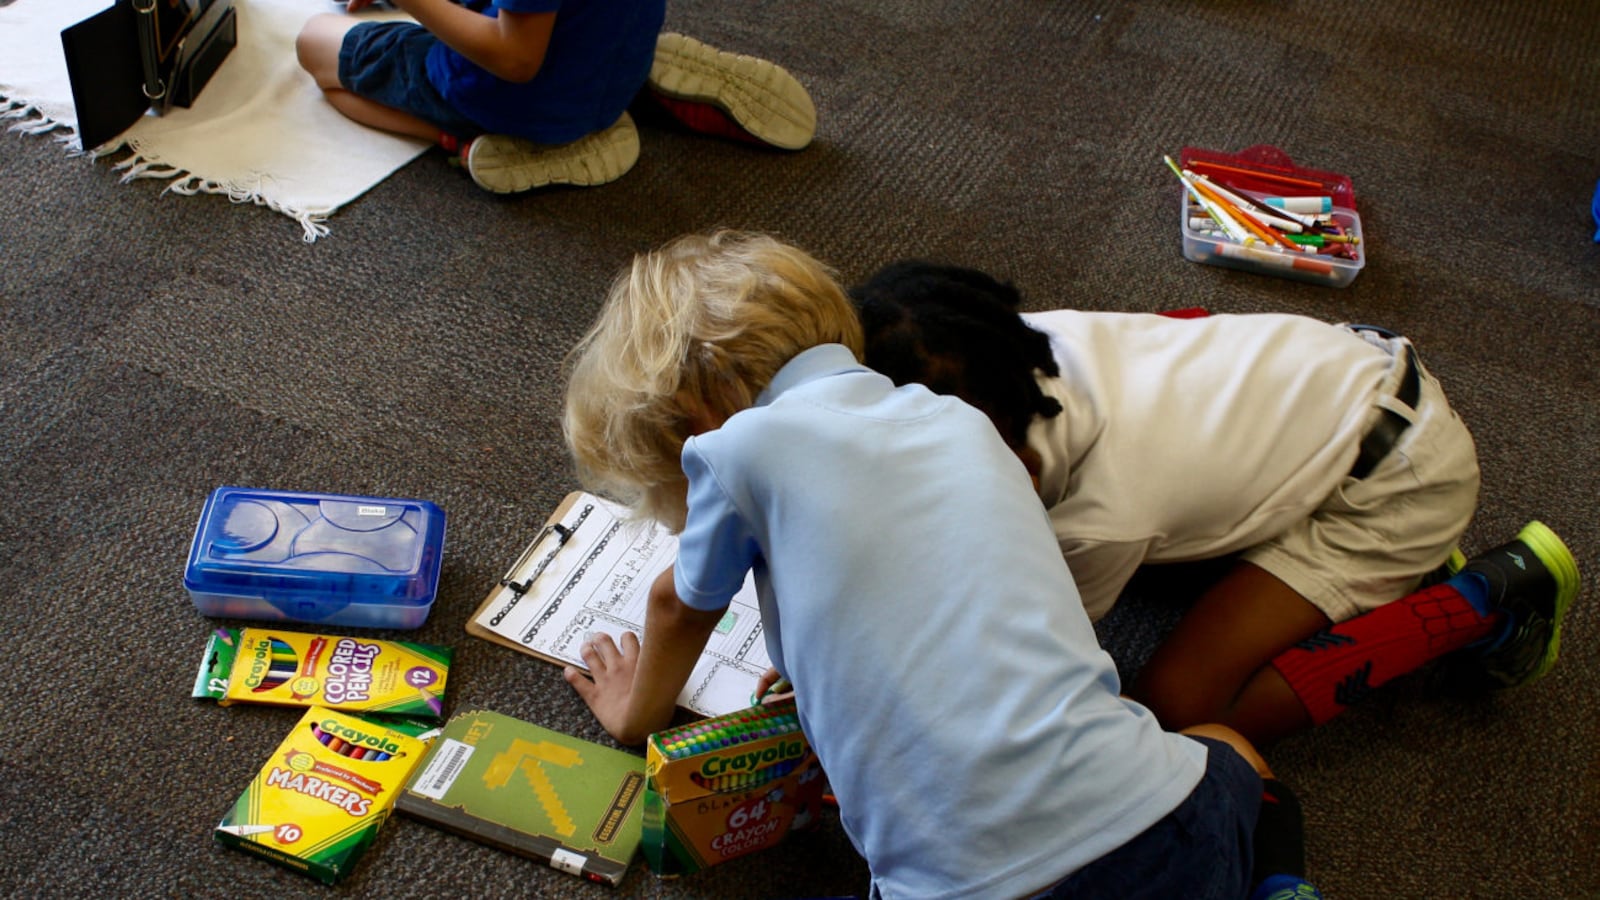 Together, two School 91 students work on reading and writing.